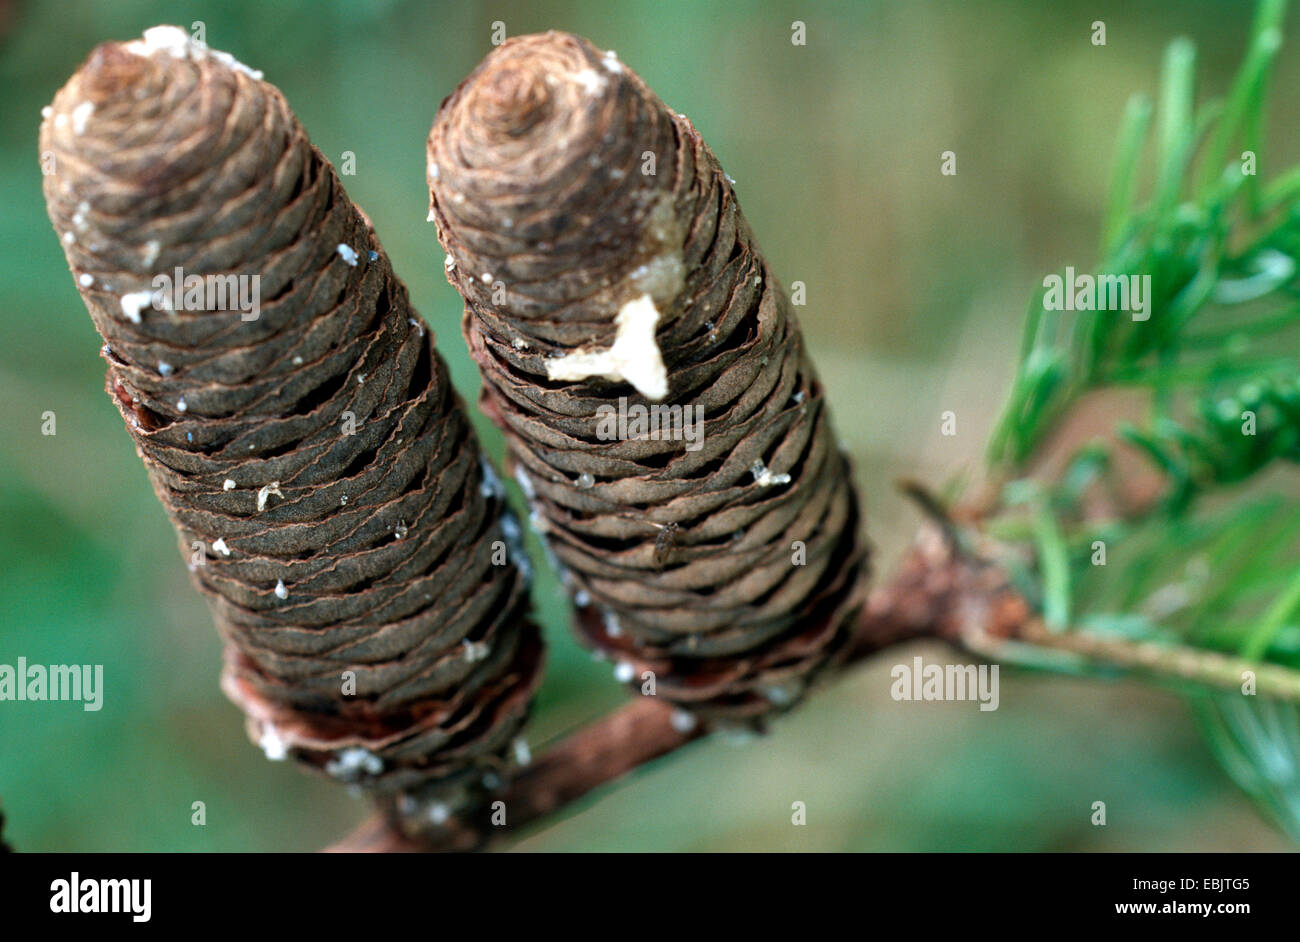 European silver fir (Abies alba), ripe cones at a branch, Germany Stock Photo